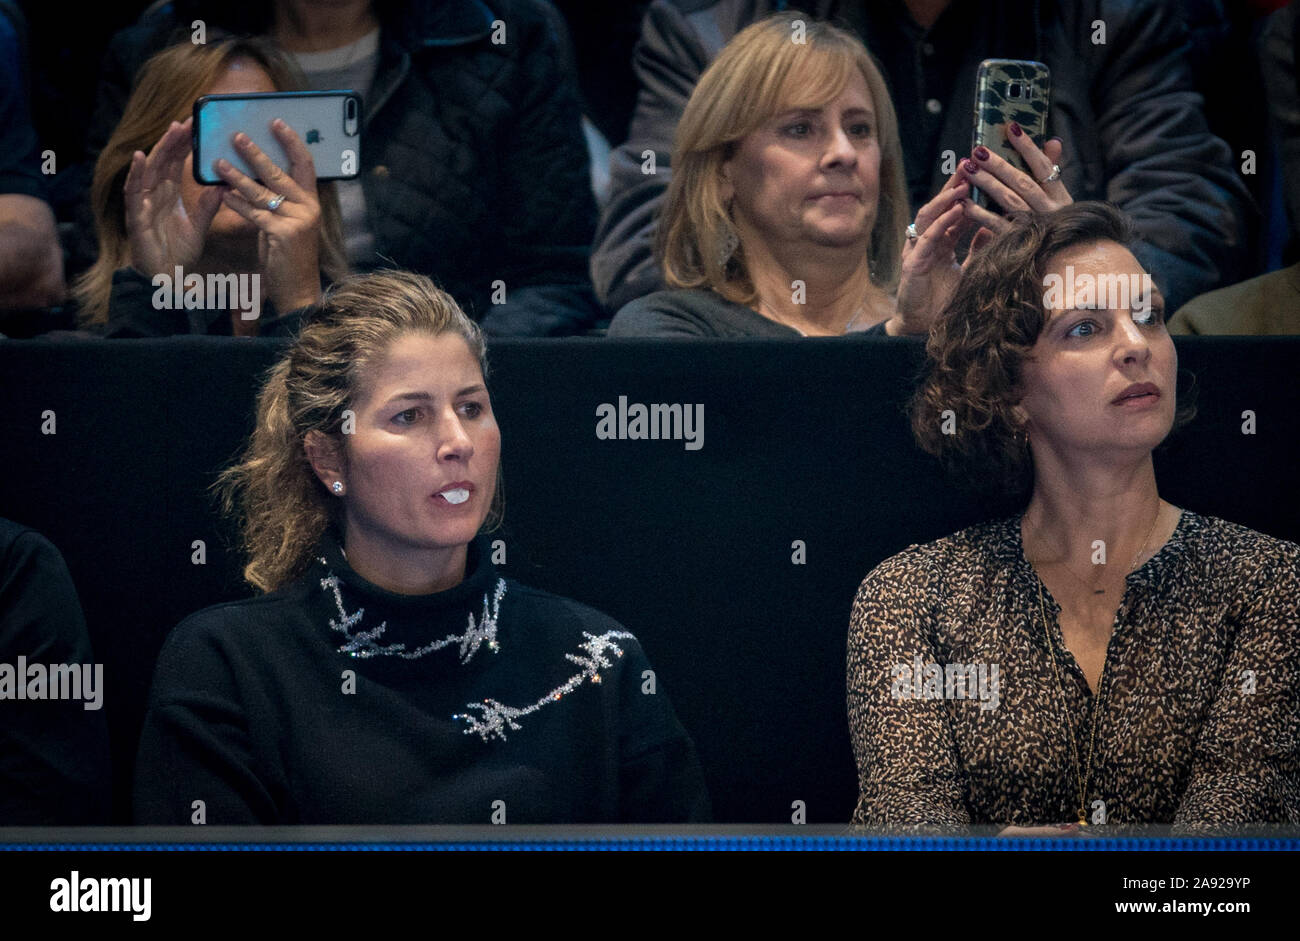 London Uk 12th Nov 2019 Miroslava Mirka Federer Wife Of Roger Left During Day 3 Of The Nitto Atp Tennis Finals London At The O2 London England On 12 November 2019 Photo By